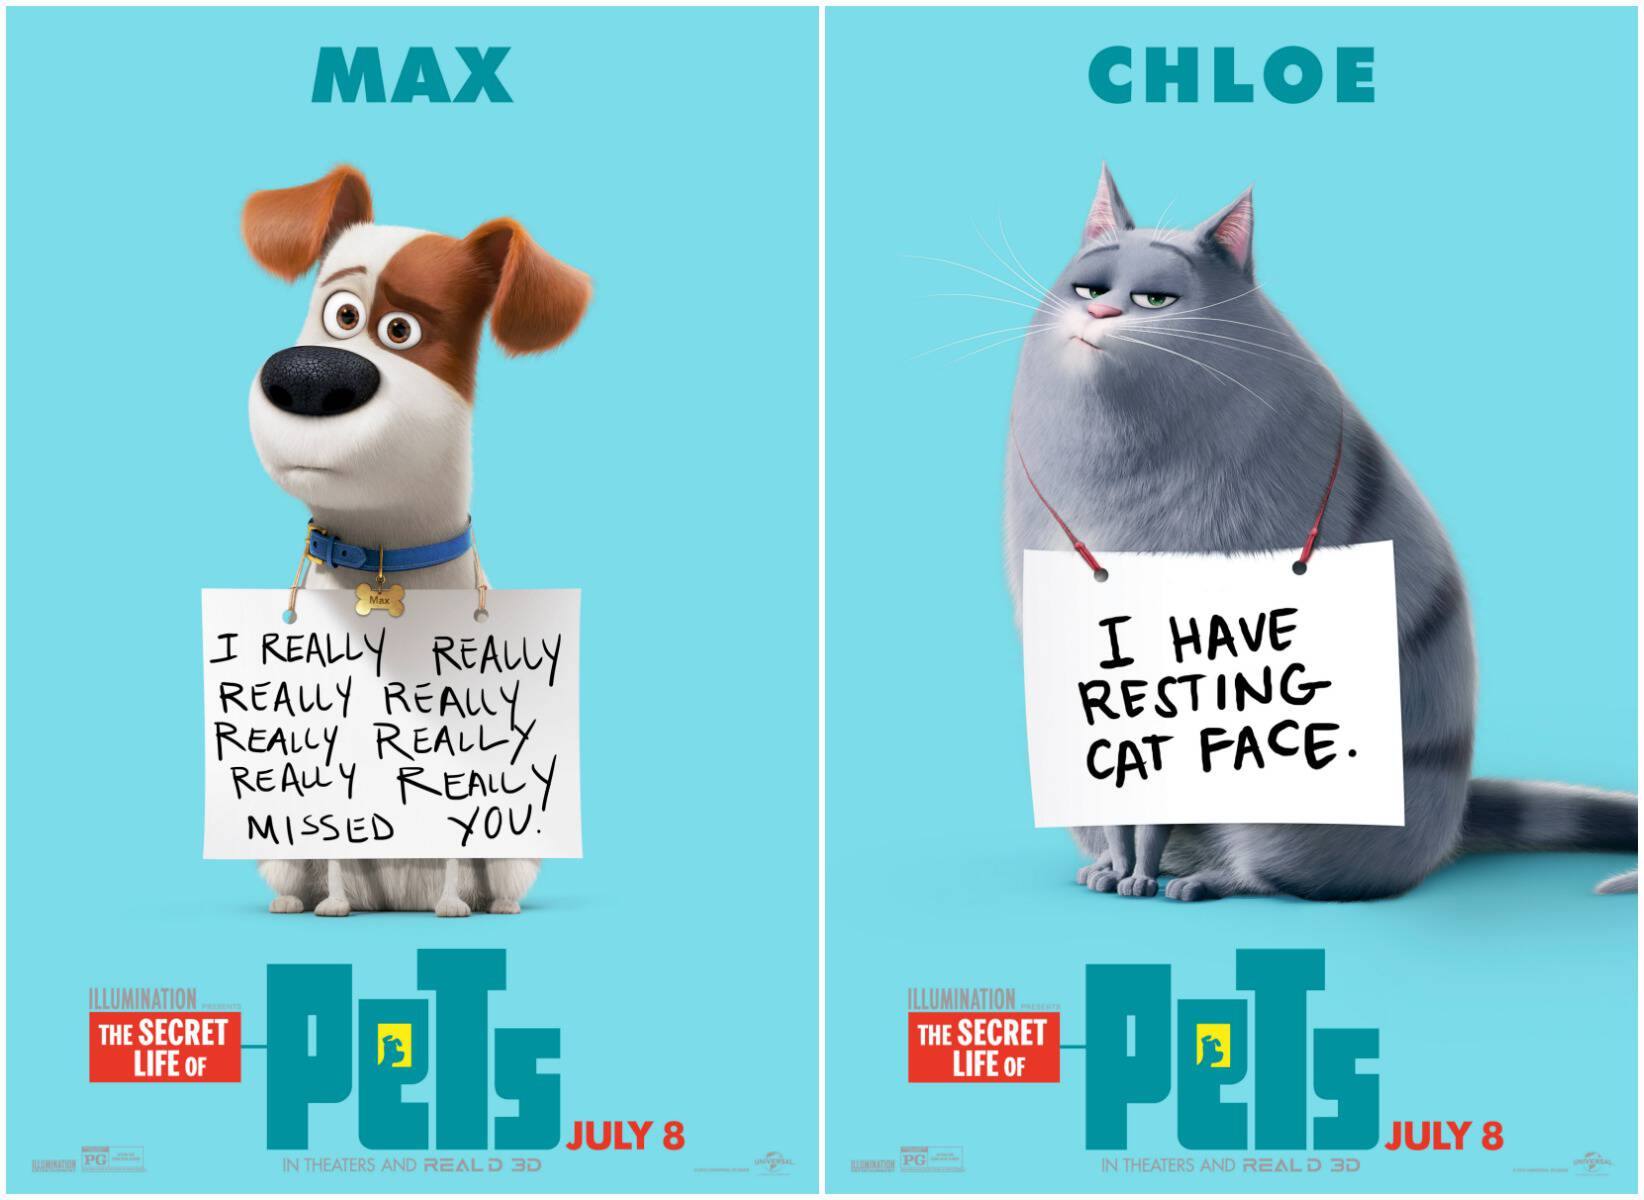 This movie looks hilarious! Get a first look at it in the new THE SECRET LIFE OF PETS trailer! Pet owners, you'll crack up! Coming July 8, 2016.